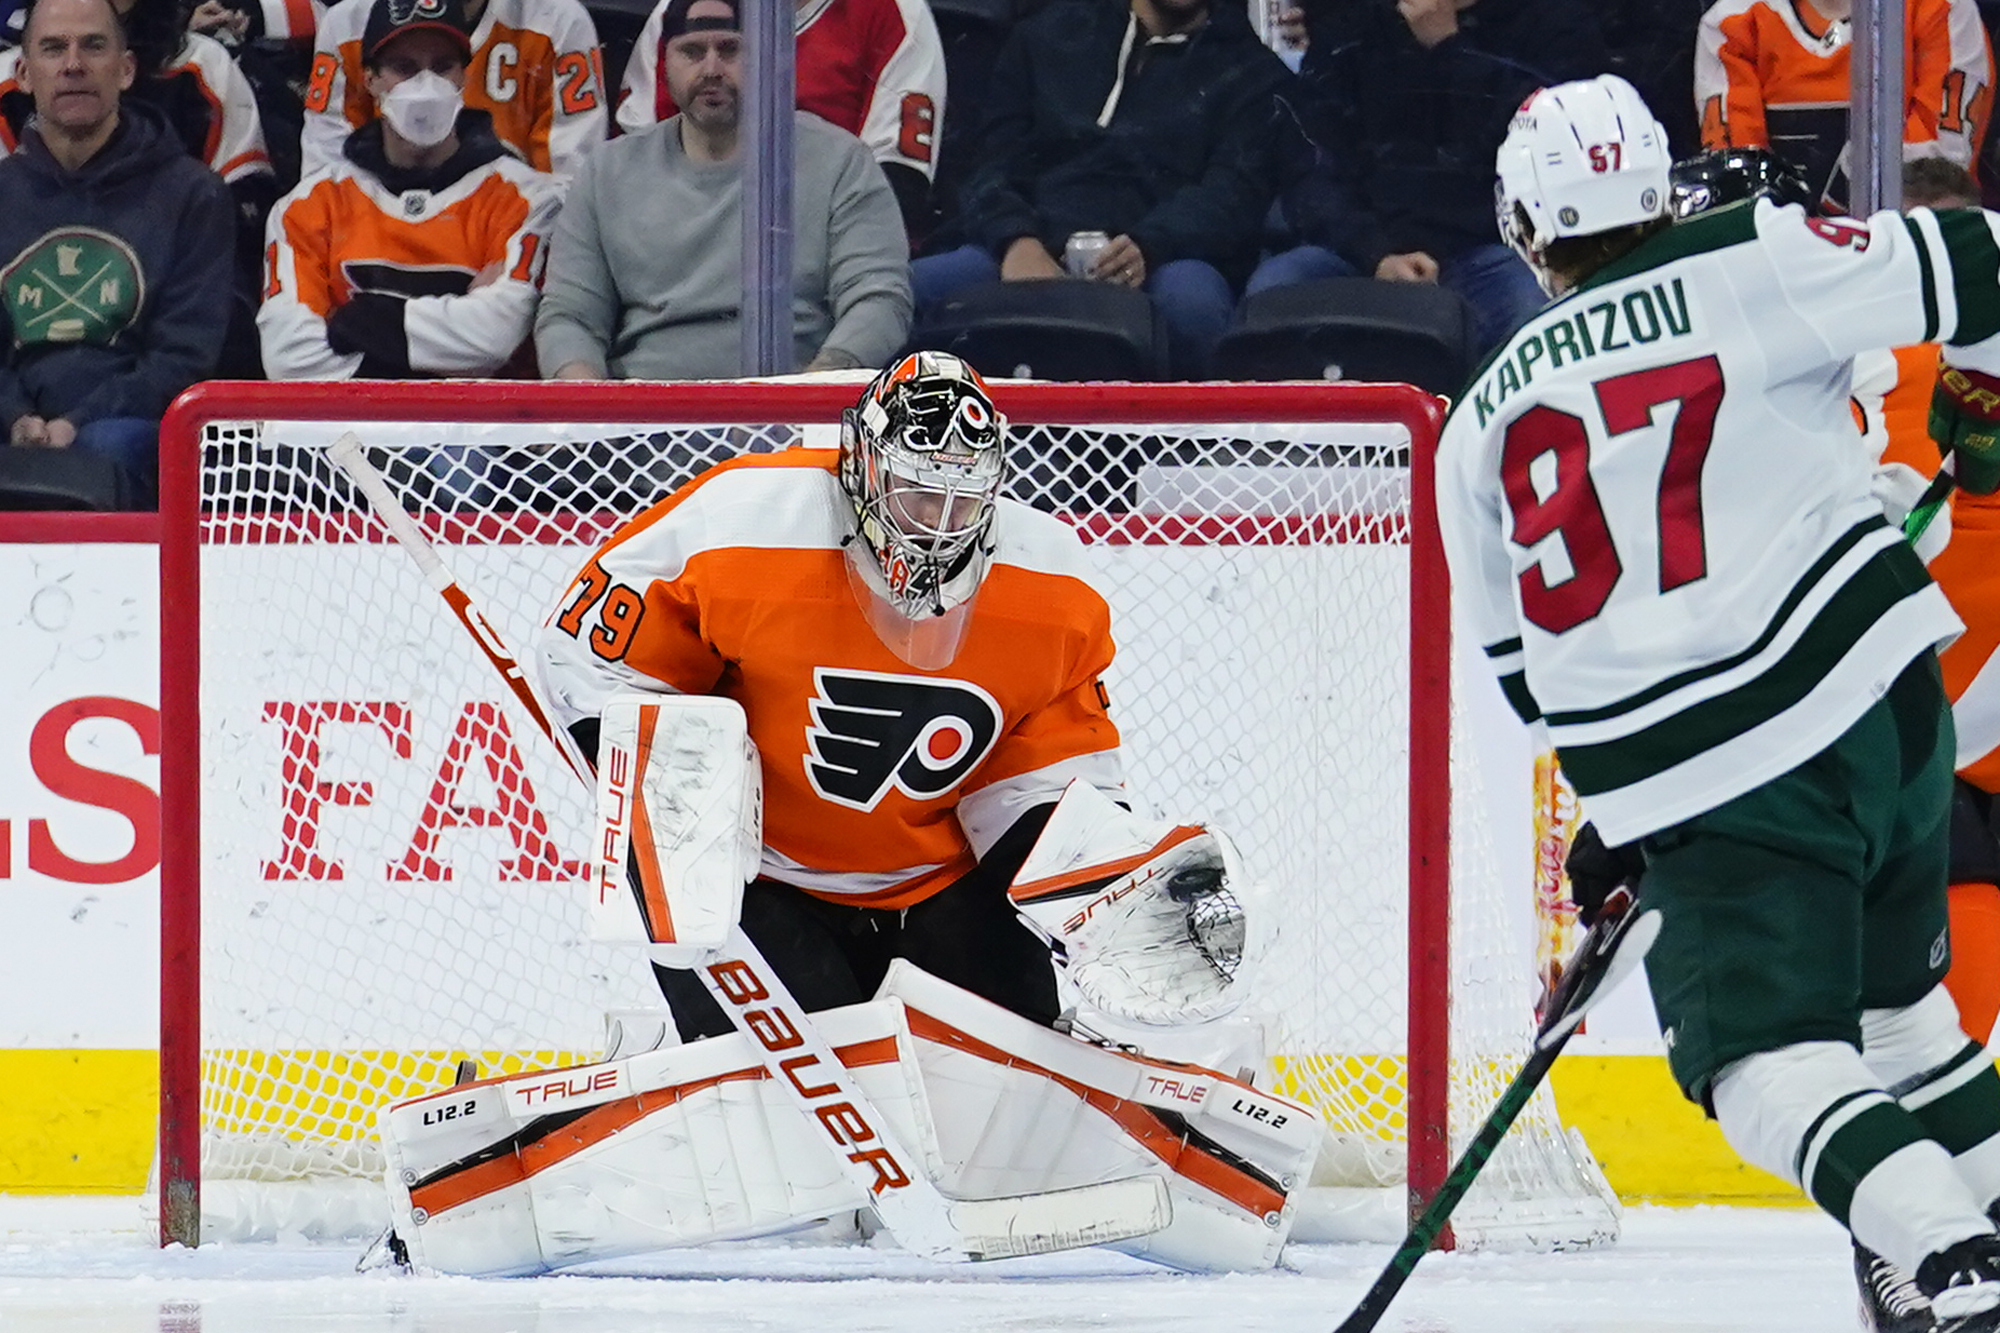 Daniel Briere sounds off on Carter Hart controversy. - HockeyFeed